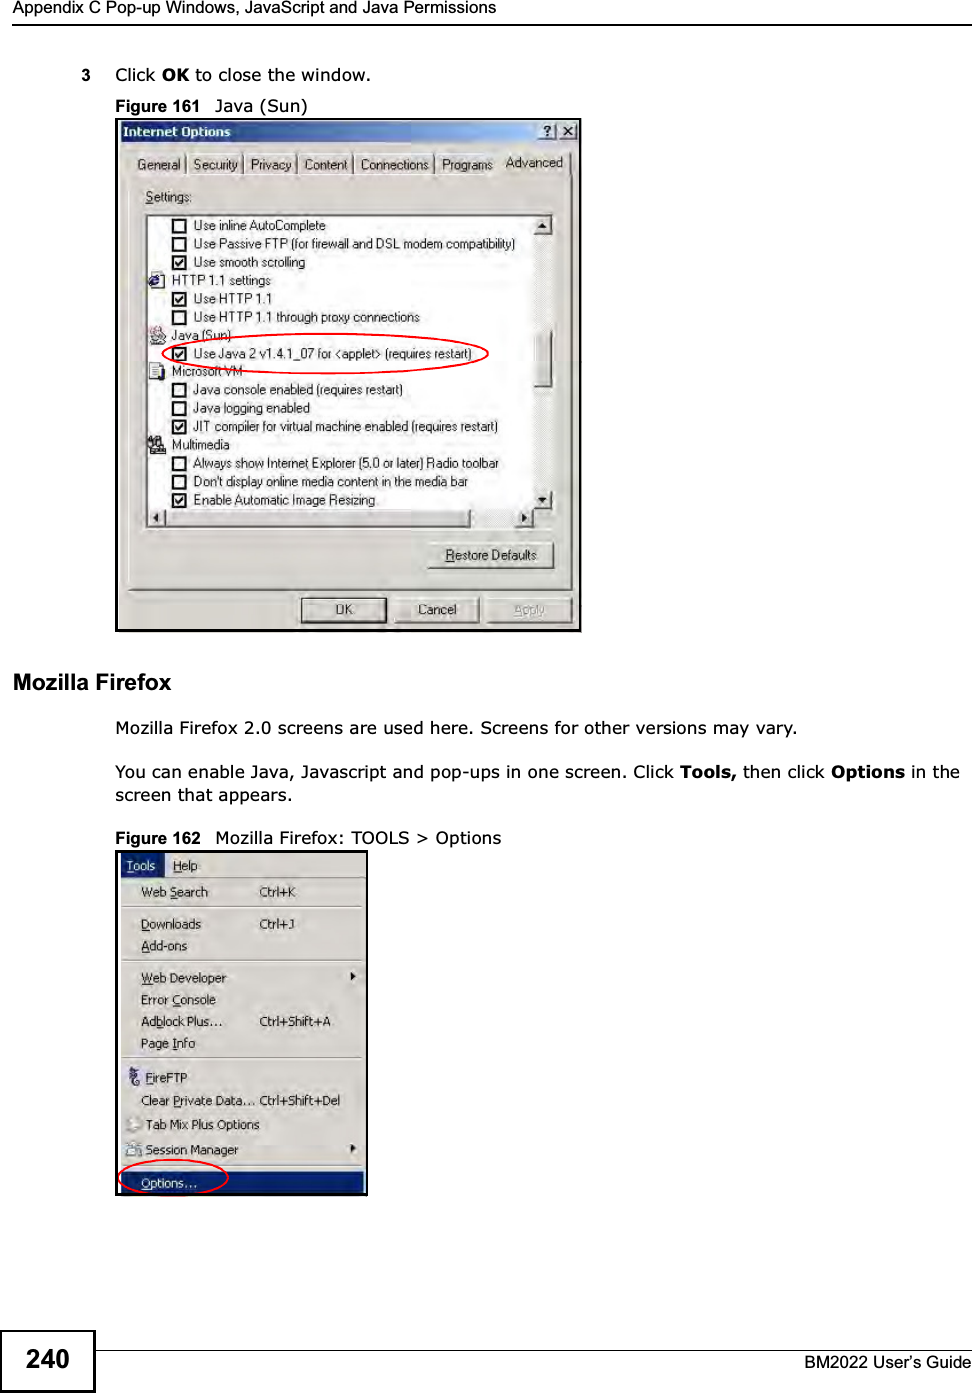 Appendix C Pop-up Windows, JavaScript and Java PermissionsBM2022 Users Guide2403Click OK to close the window.Figure 161   Java (Sun)Mozilla FirefoxMozilla Firefox 2.0 screens are used here. Screens for other versions may vary. You can enable Java, Javascript and pop-ups in one screen. Click Tools, then click Options in the screen that appears.Figure 162   Mozilla Firefox: TOOLS &gt; Options